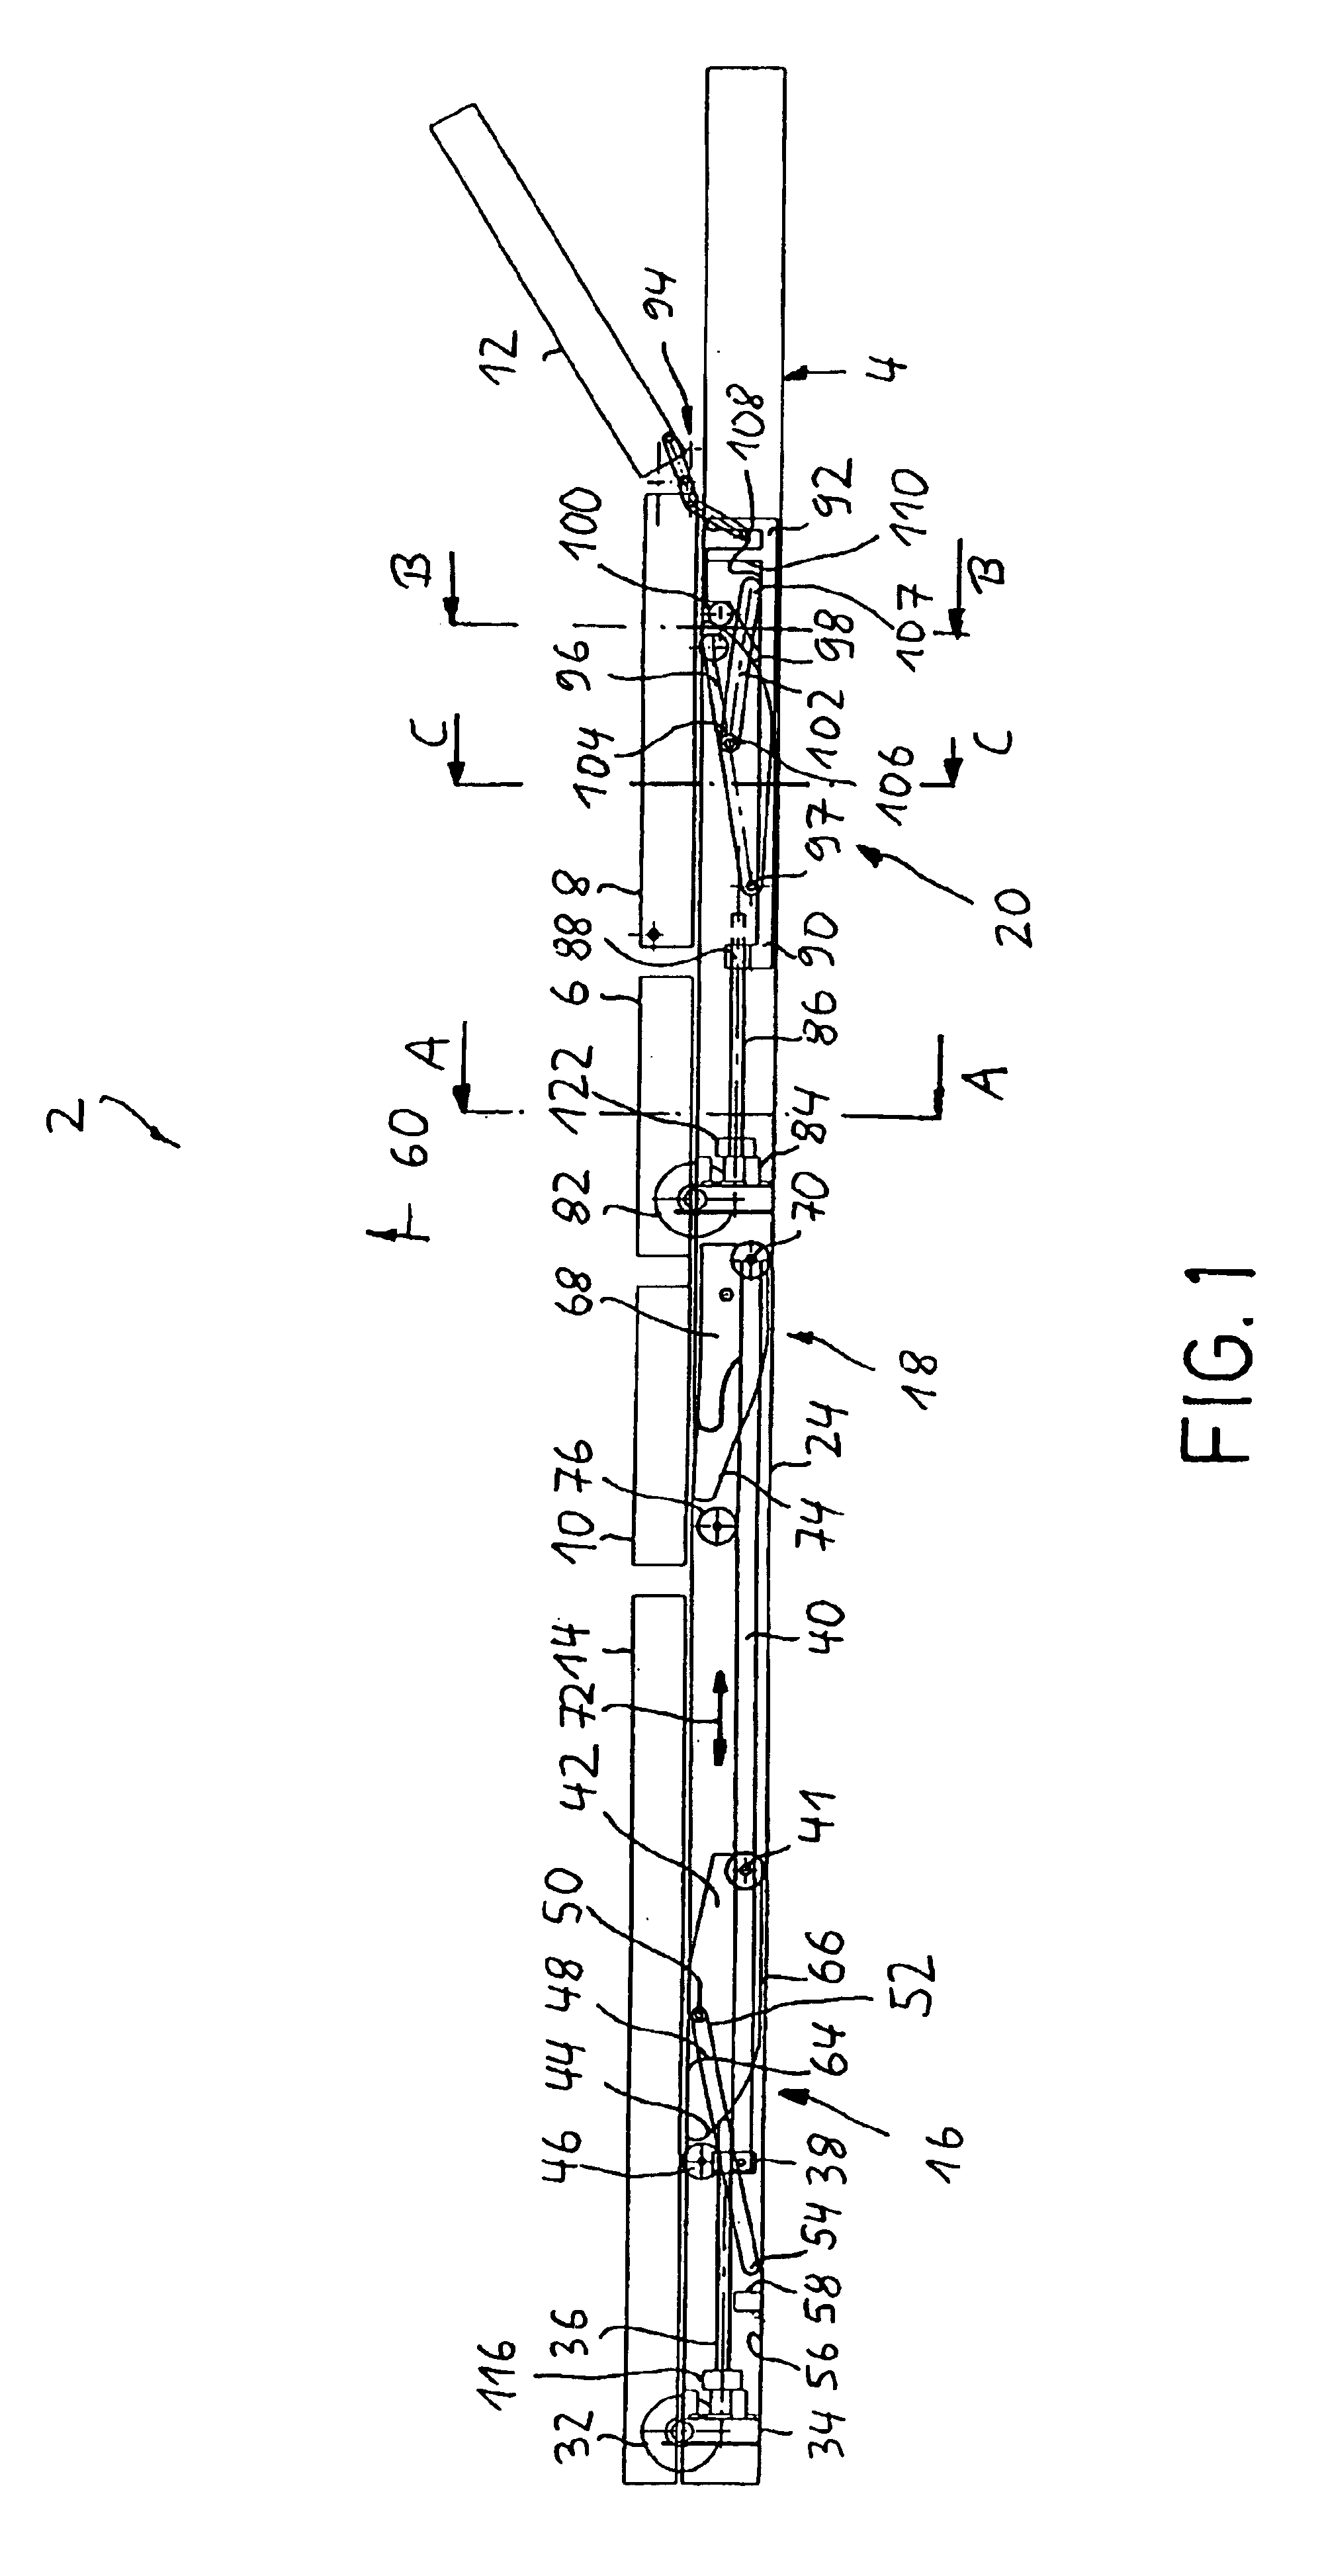 Motor adjustable support device for the upholstery of a seat and/or reclining furniture